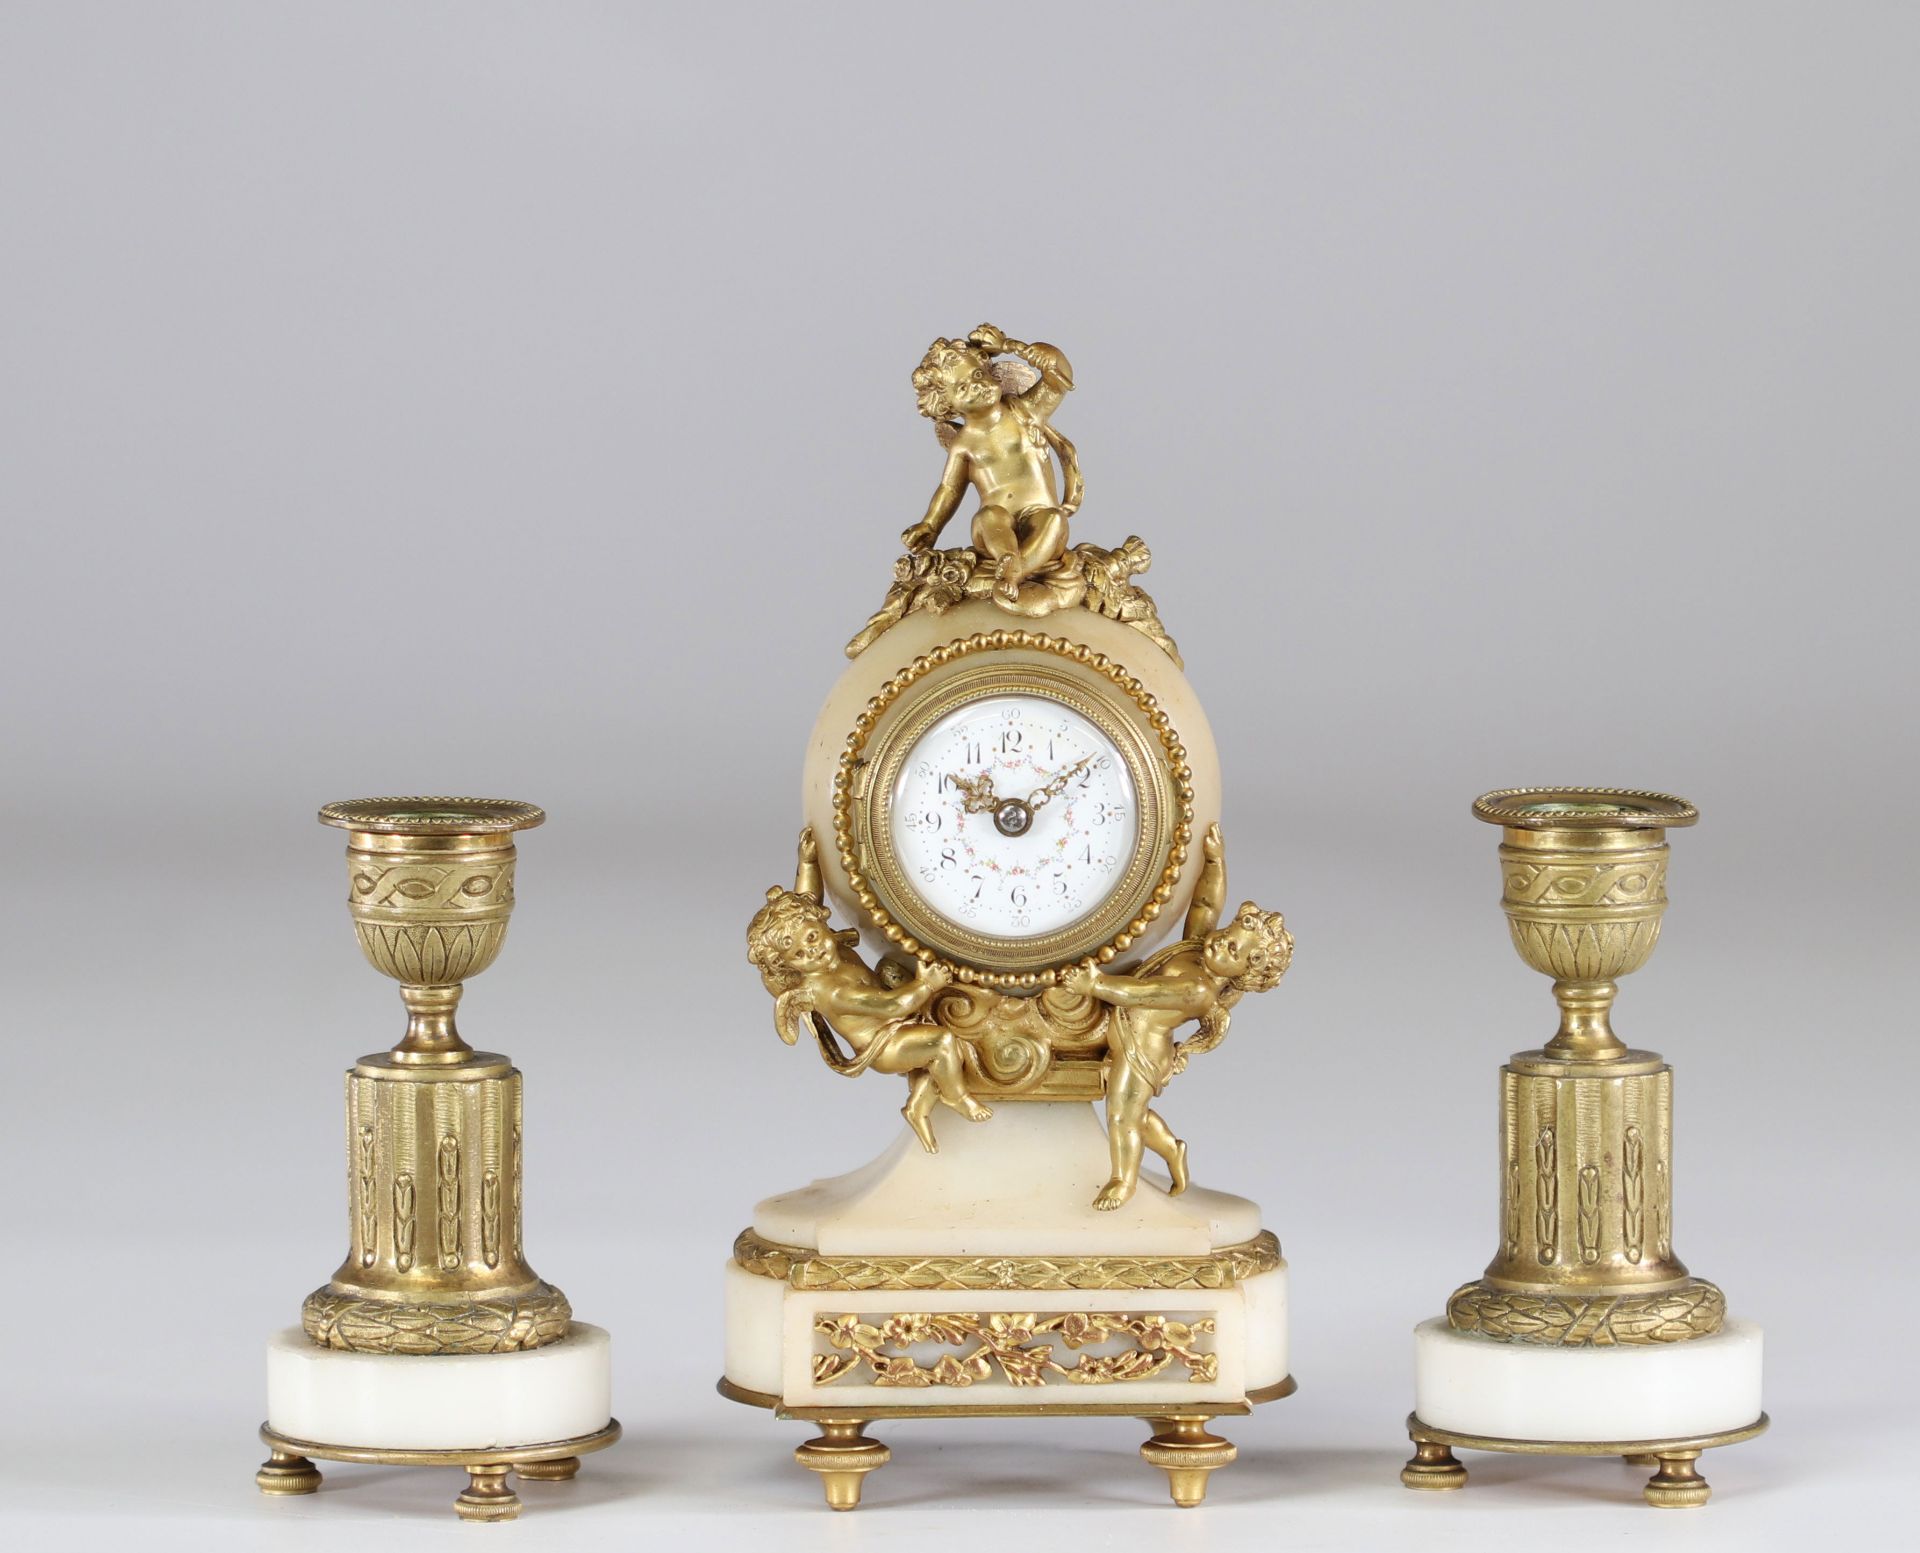 Louis XV style bronze and marble desk garniture and candlesticks